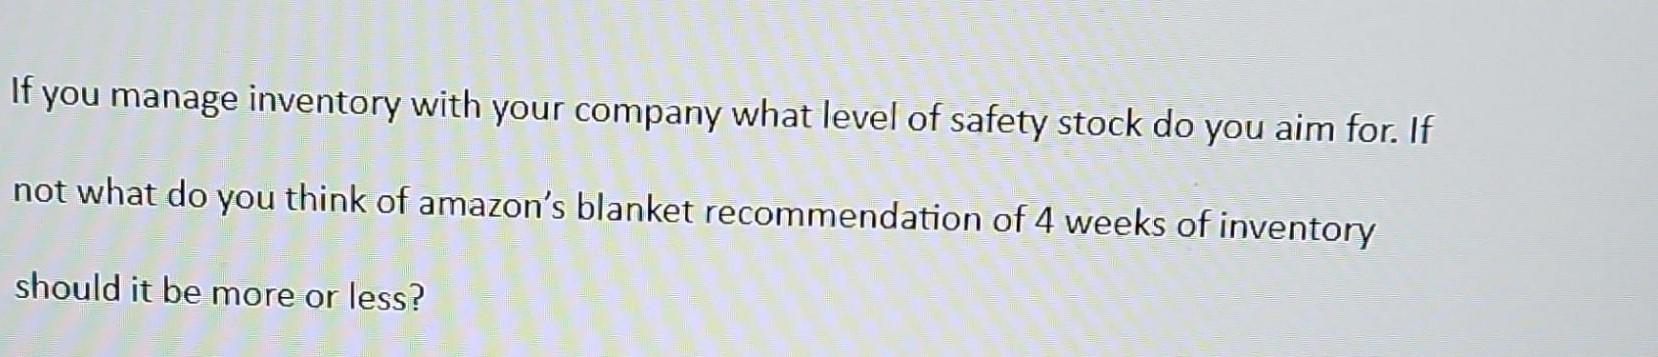 If you manage inventory with your company what level of safety stock do you aim for. If not what do you think